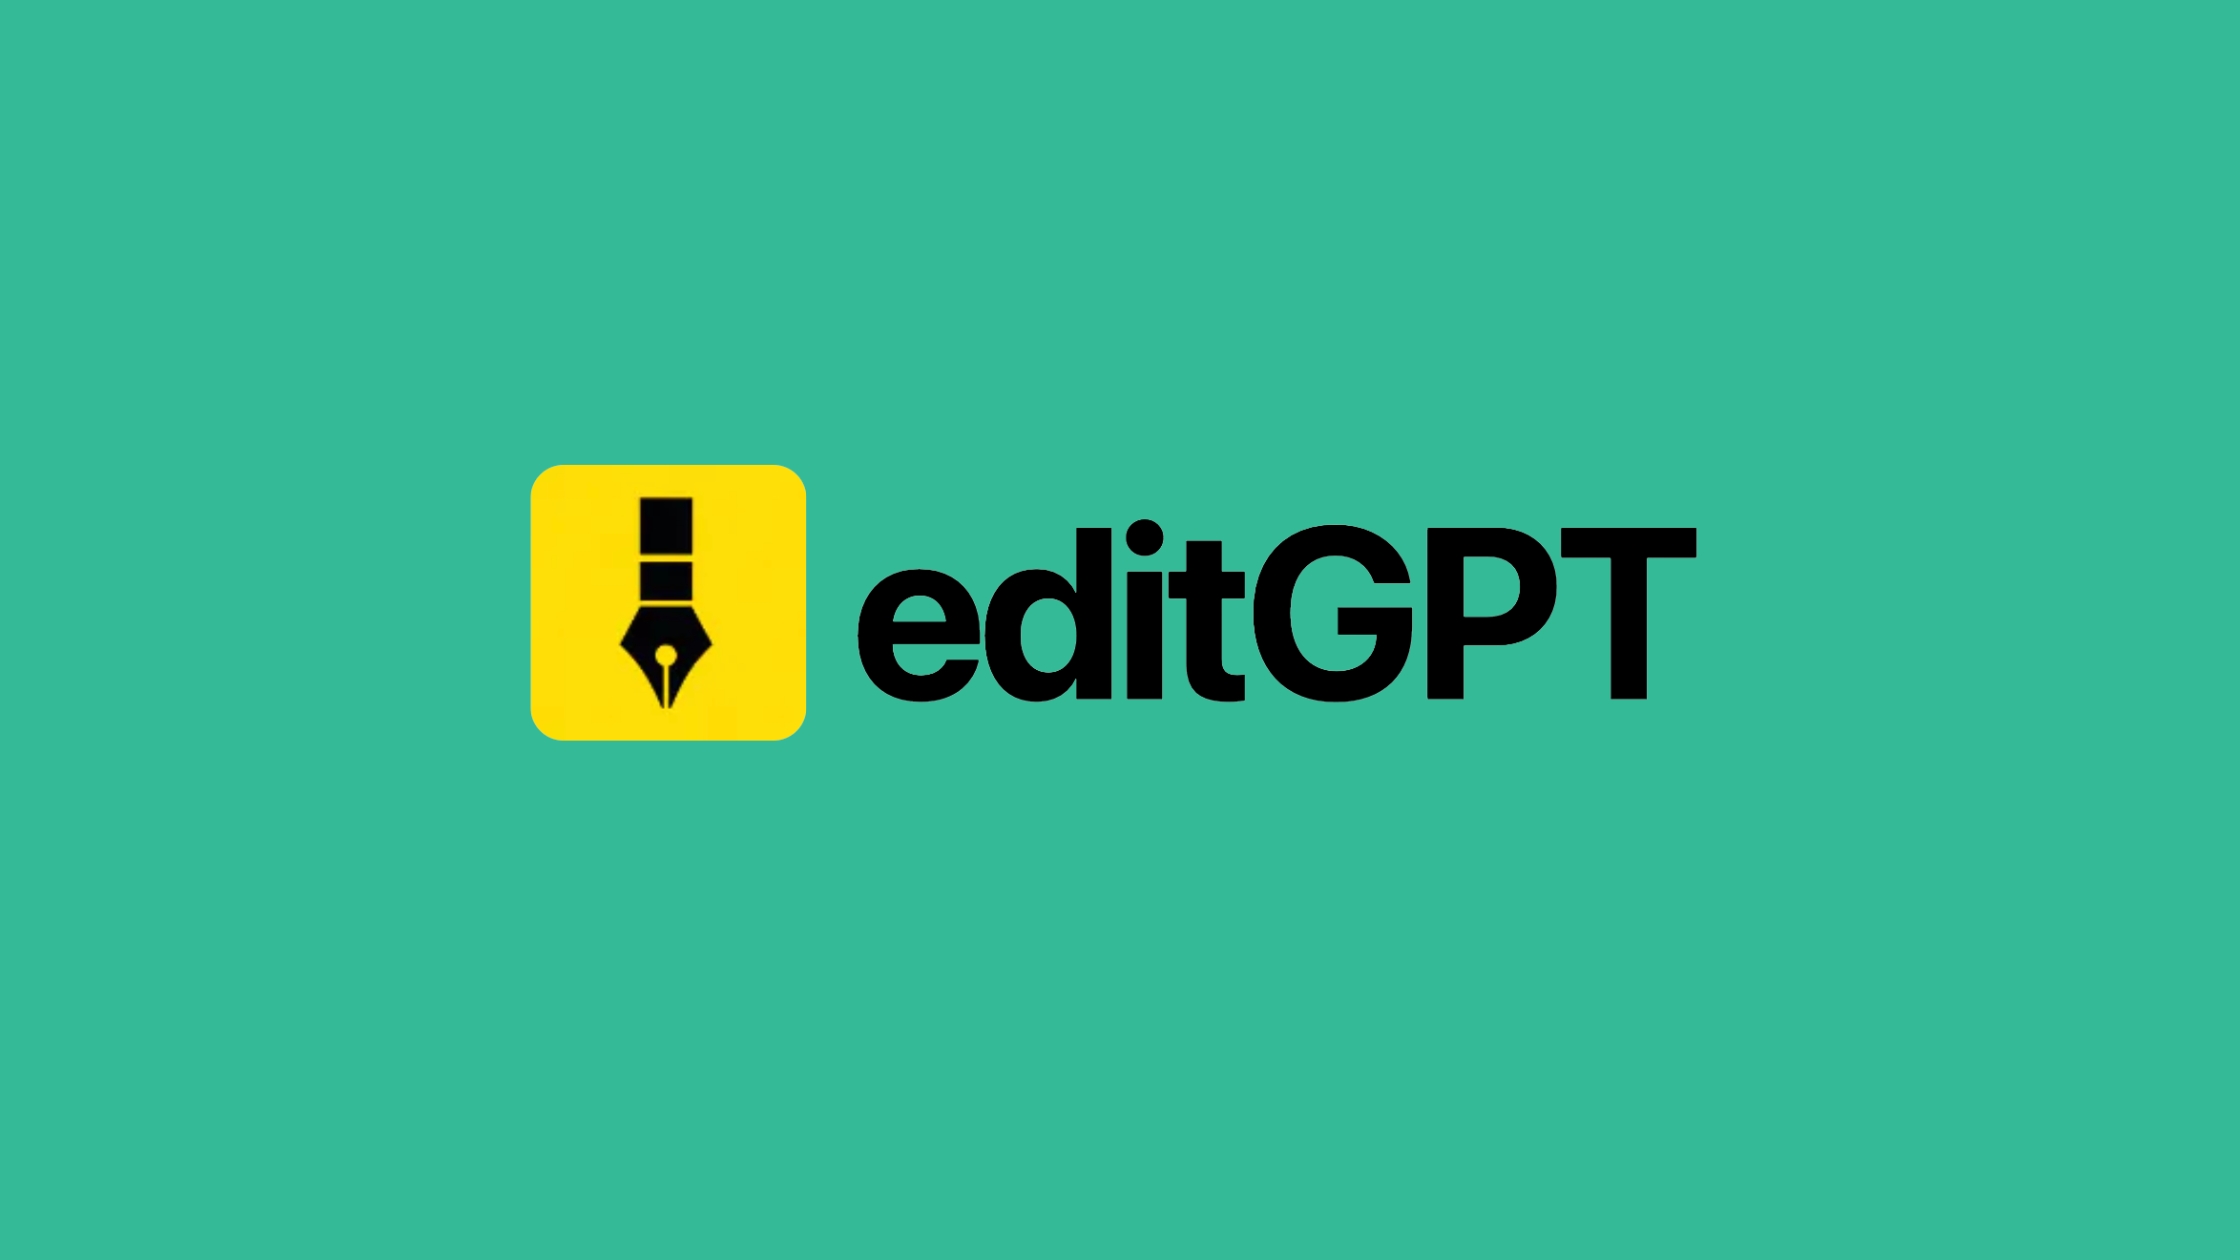 This Extension Allows Grammarly-like Edits on ChatGPT